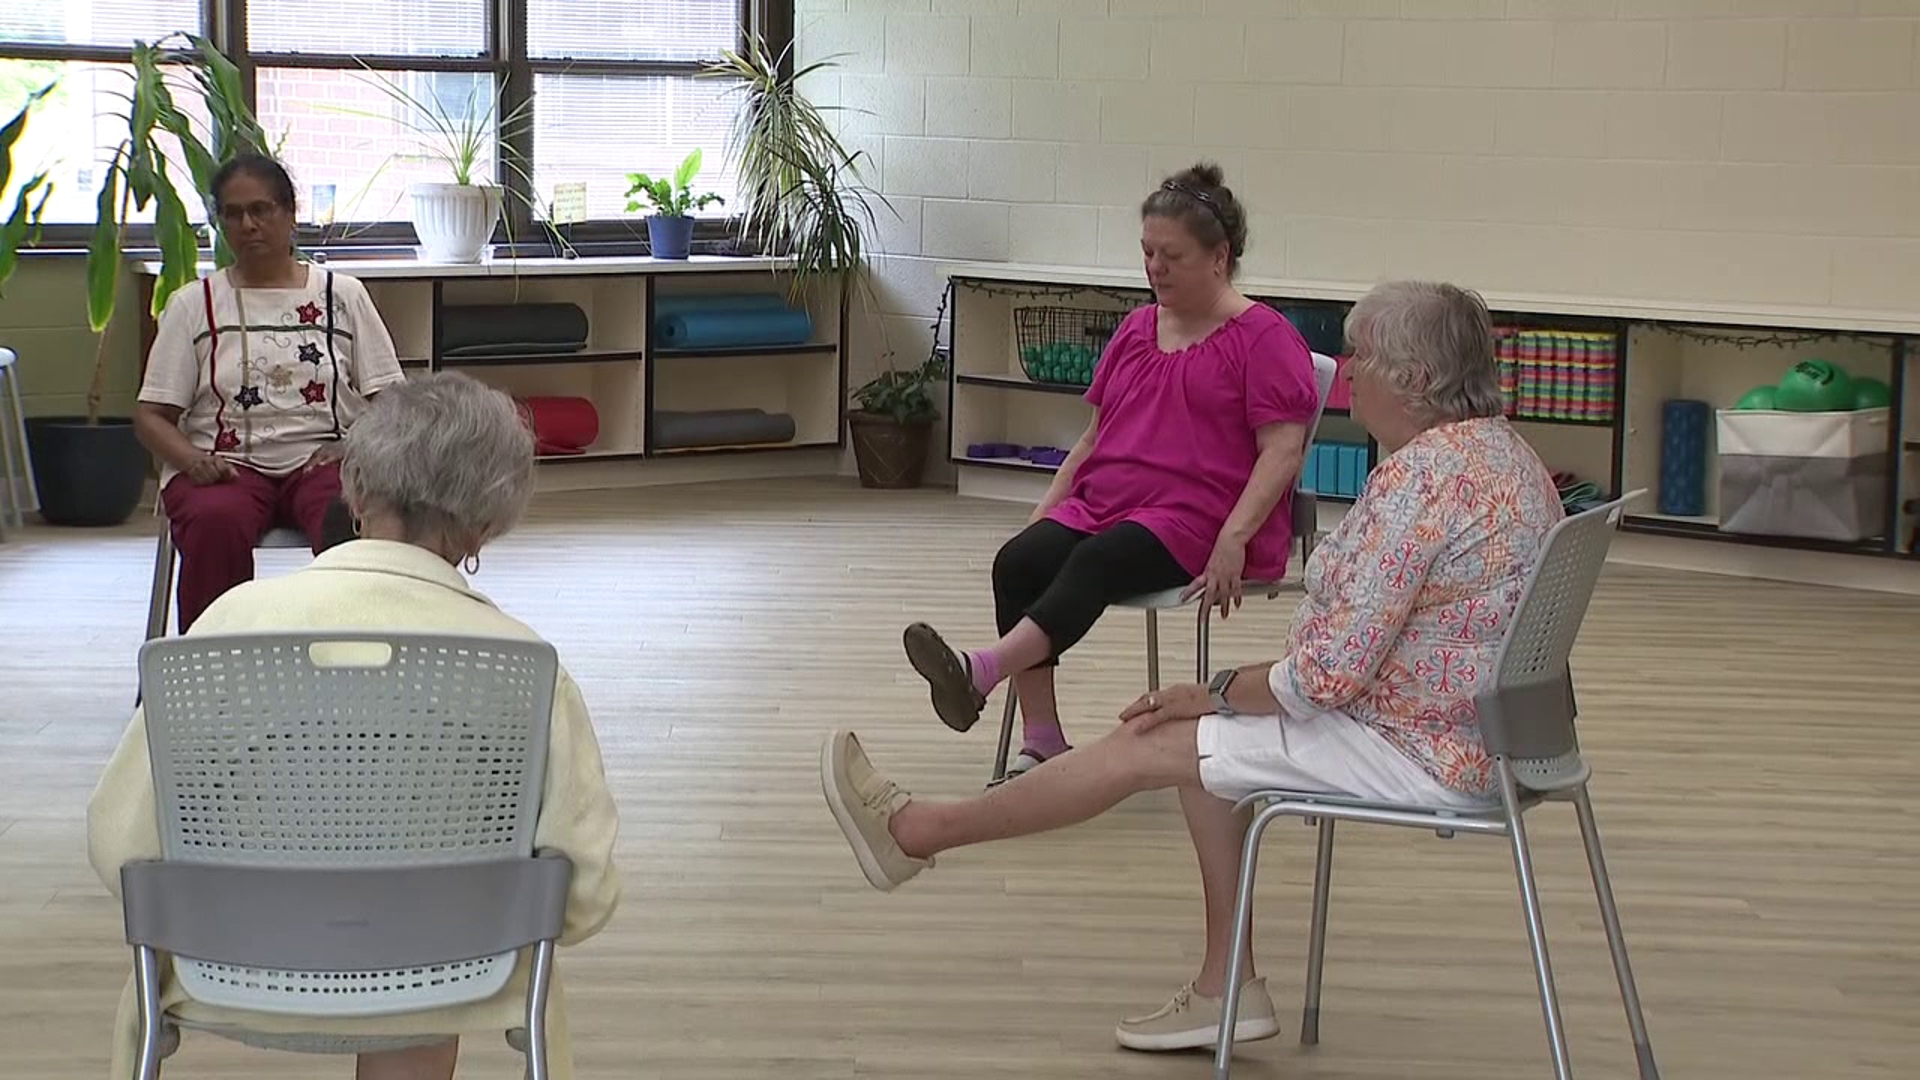 Newswatch 16's Emily Kress stopped by a community center in the Poconos where some seniors are taking advantage of some cool activities indoors.